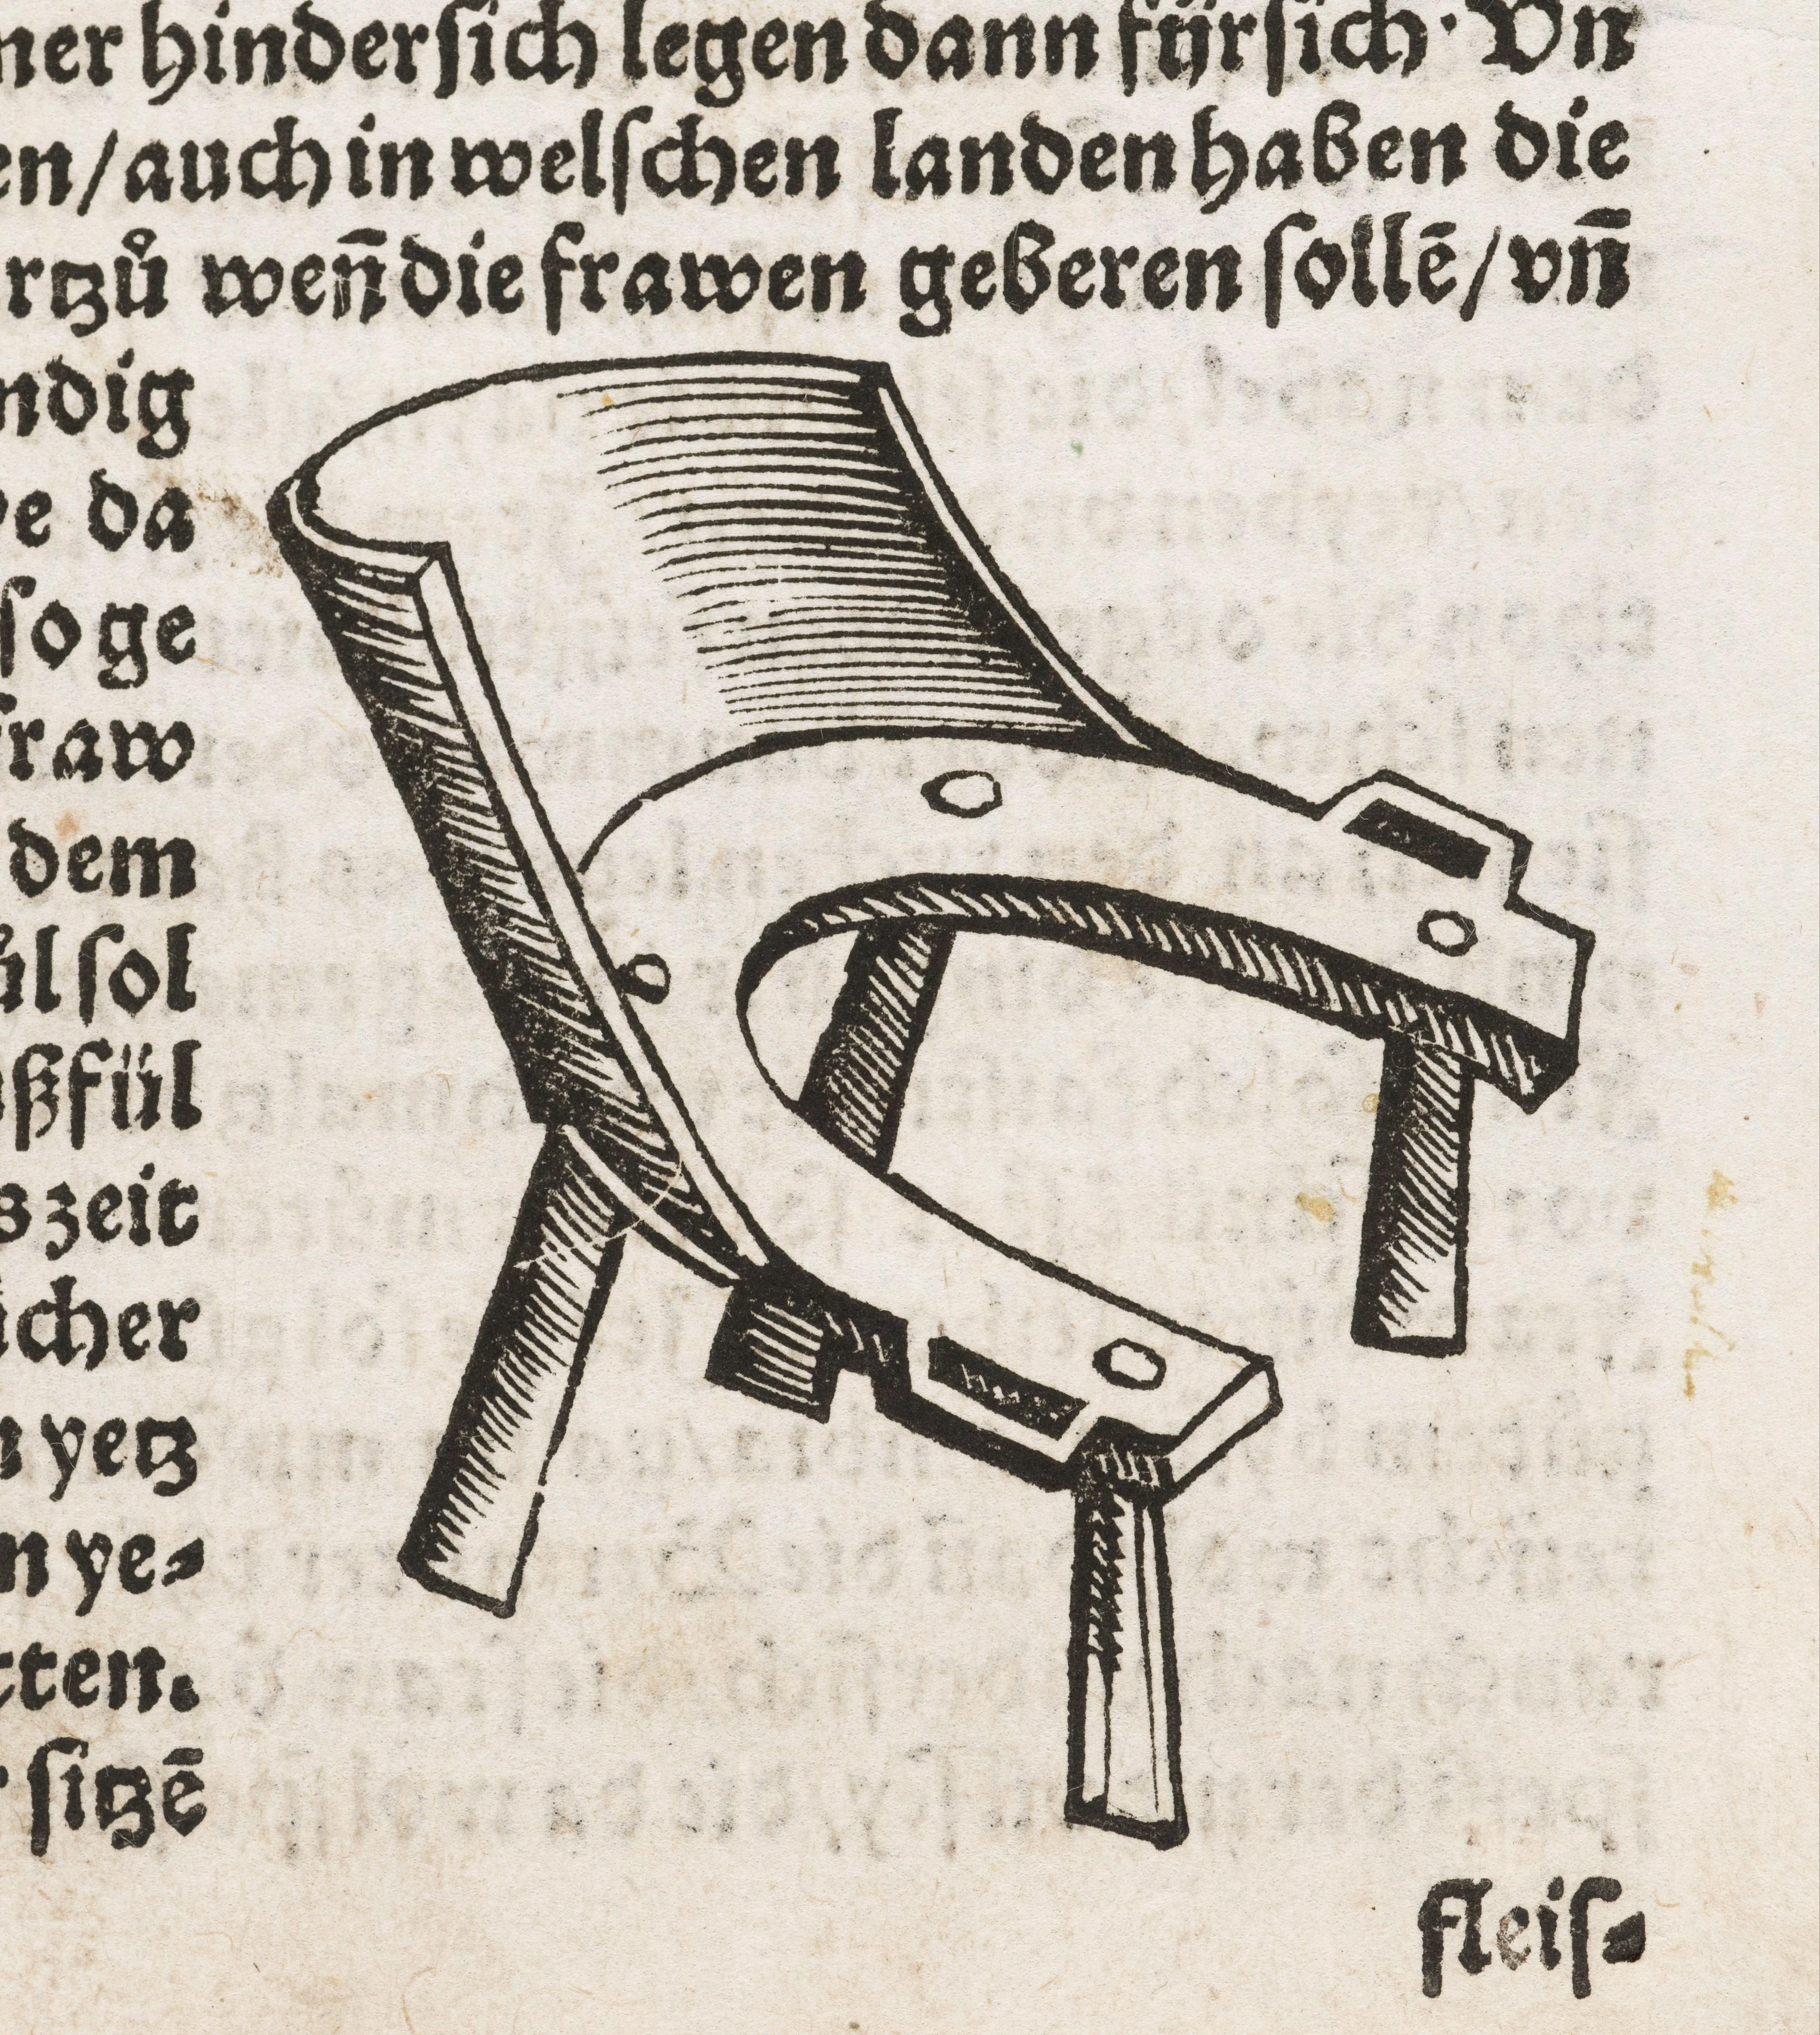 Illustration of a birthing stool. Wellcome Images/Creative Commons/Wikimedia Commons